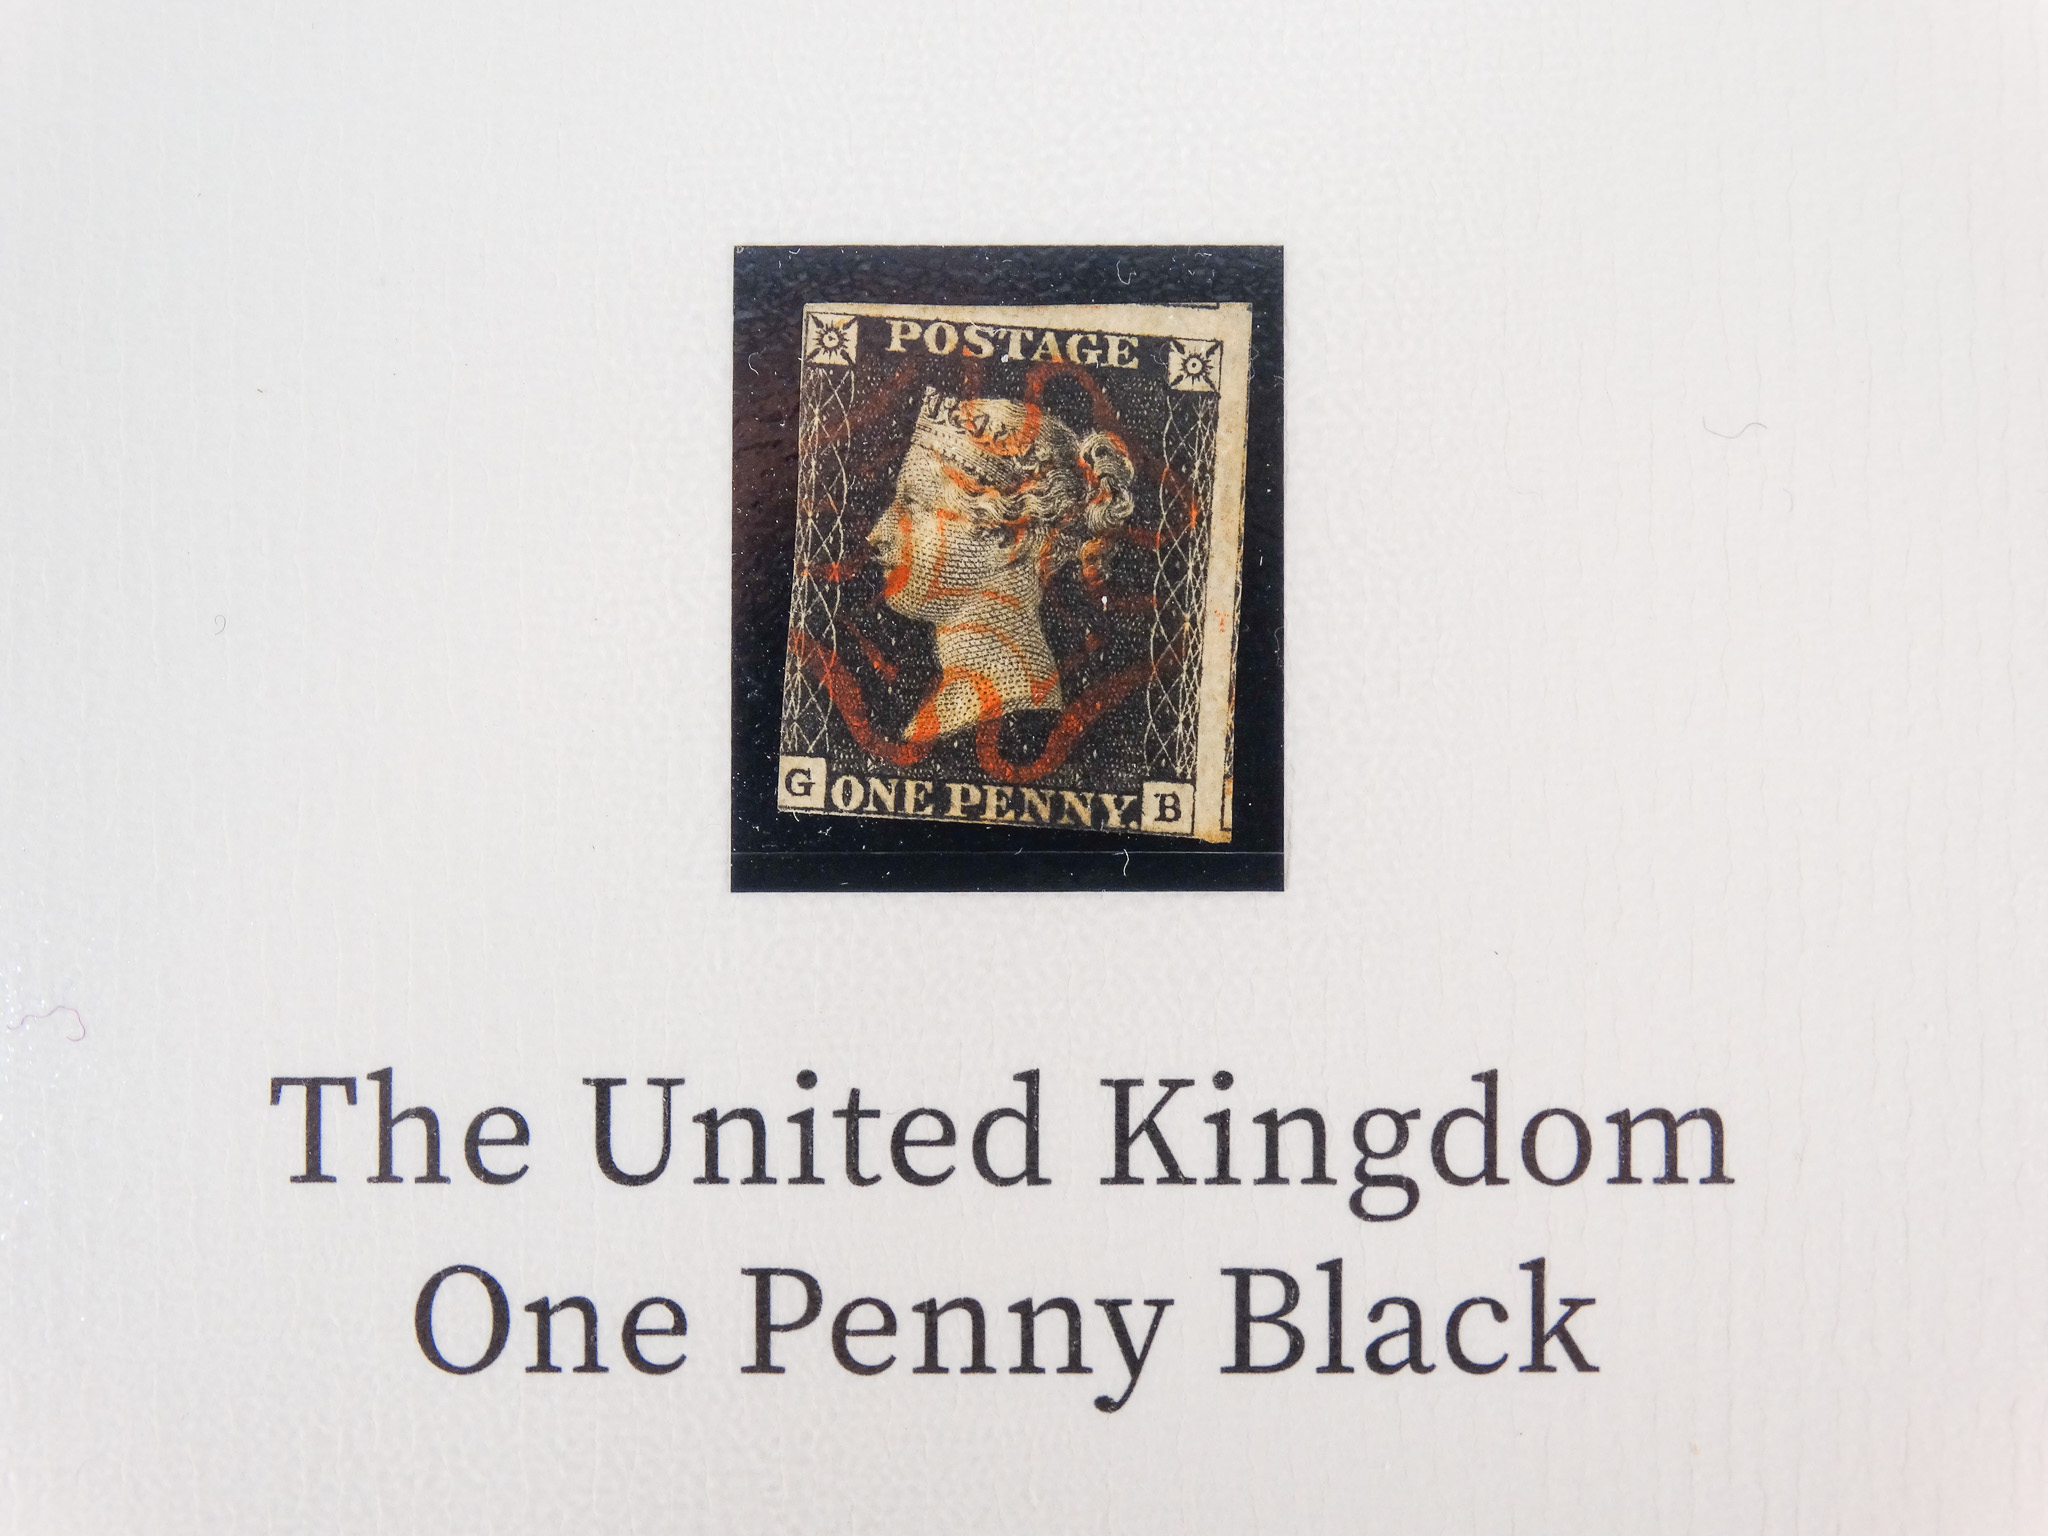 GB 1840 1d BLACK - 2 very large margin 1840 1d black with red Maltese Cross cancel contained in a - Image 3 of 3